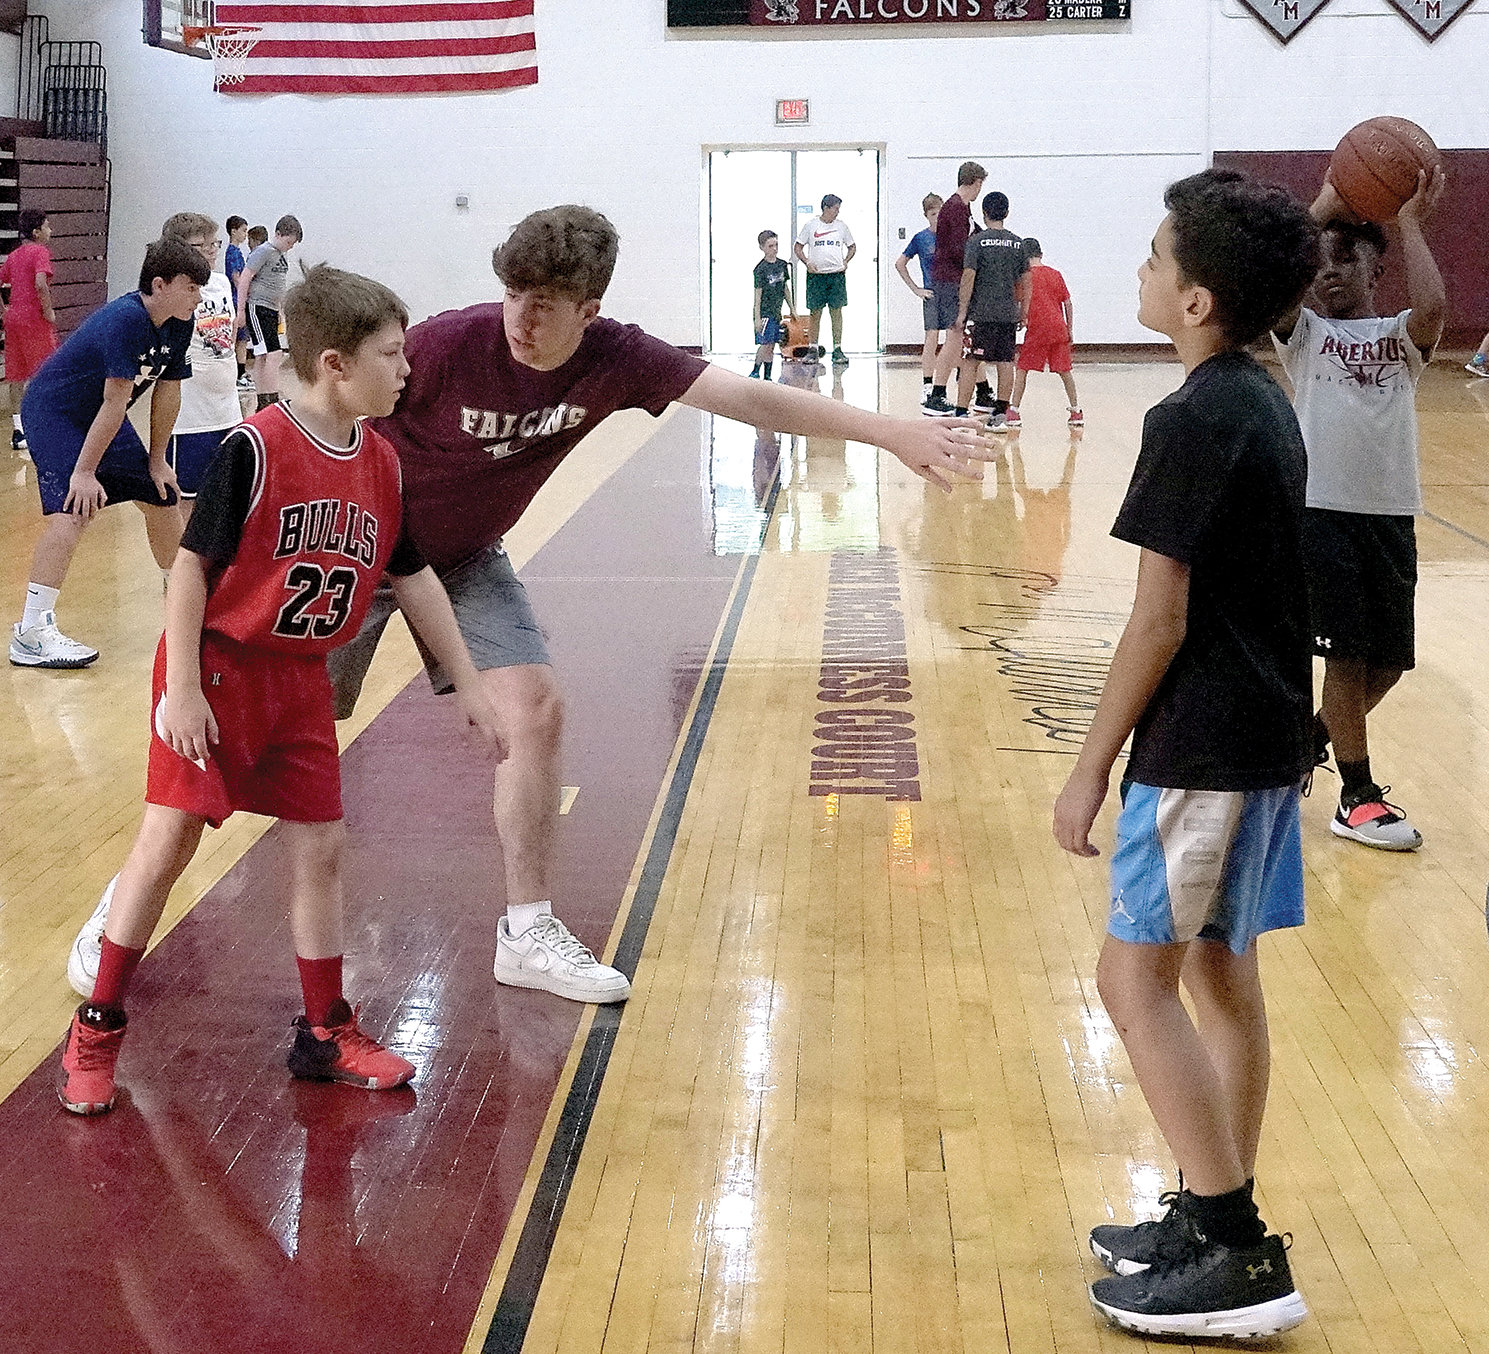 Camp counselor Shane Montgomery guides campers during the 2021 Falcon Basketball Camp at Albertus Magnus High School in Bardonia July 29.